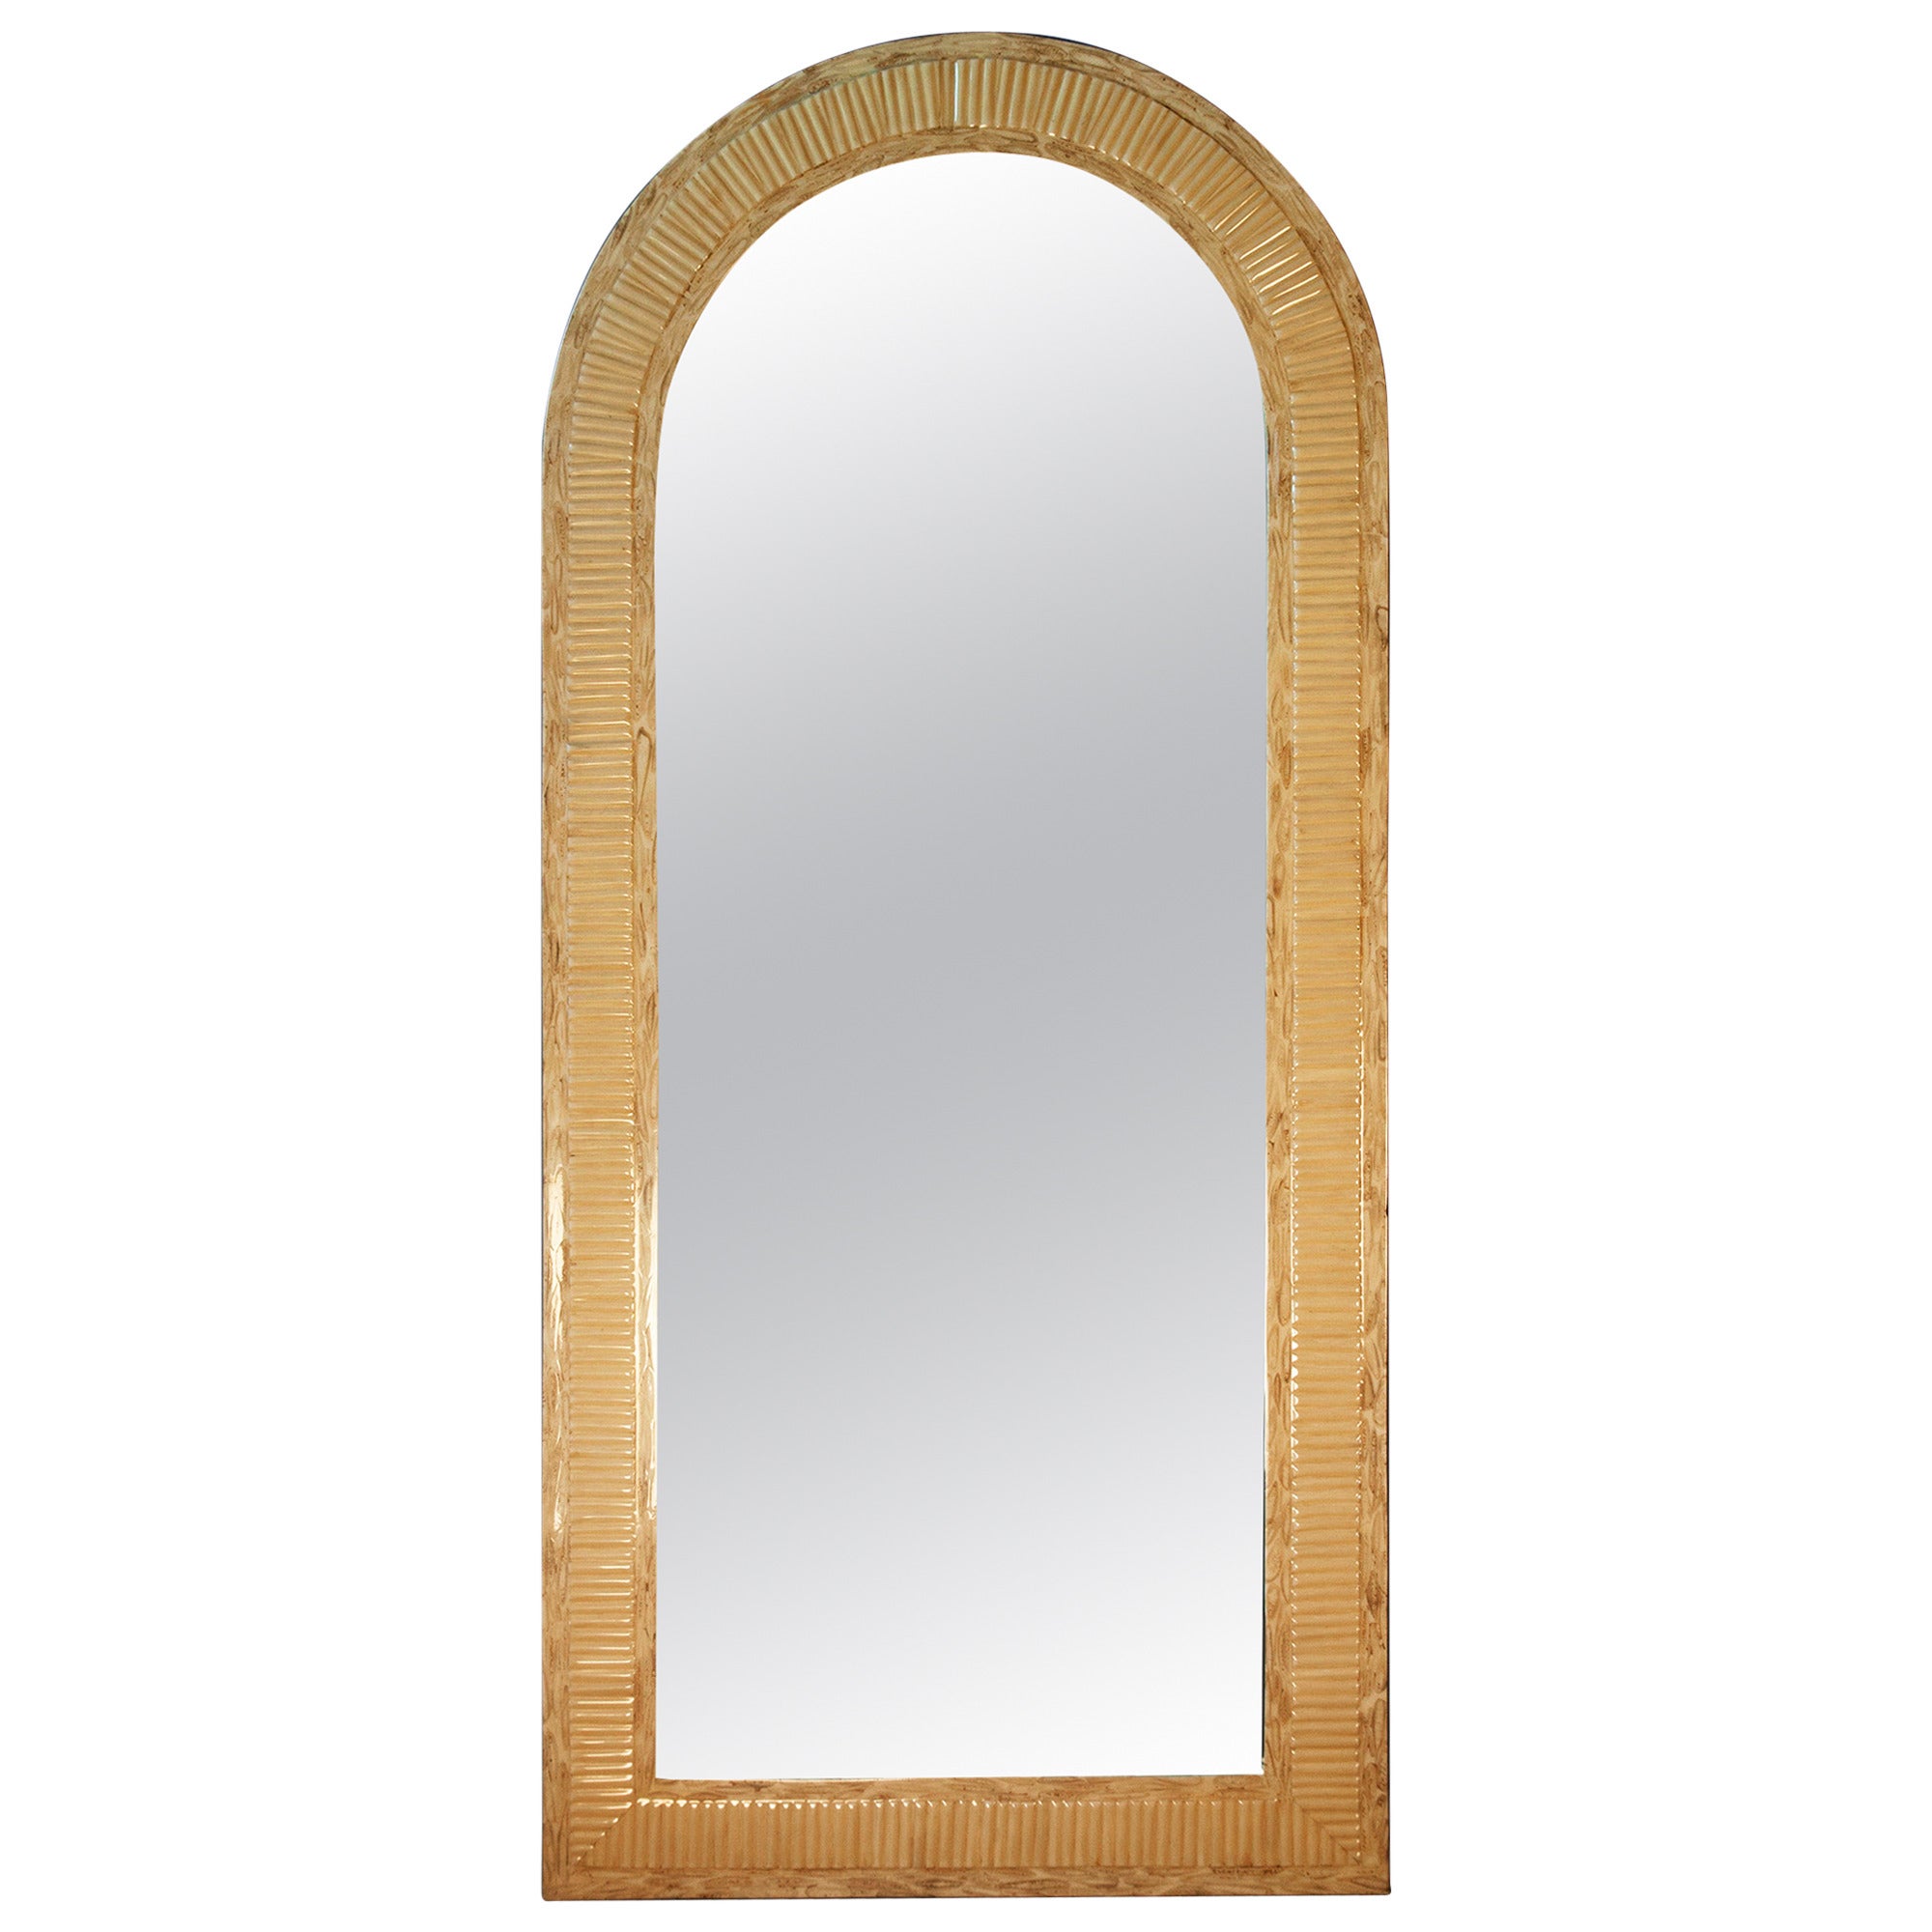 Lacquered Frame Mirror by Enrique Garcel